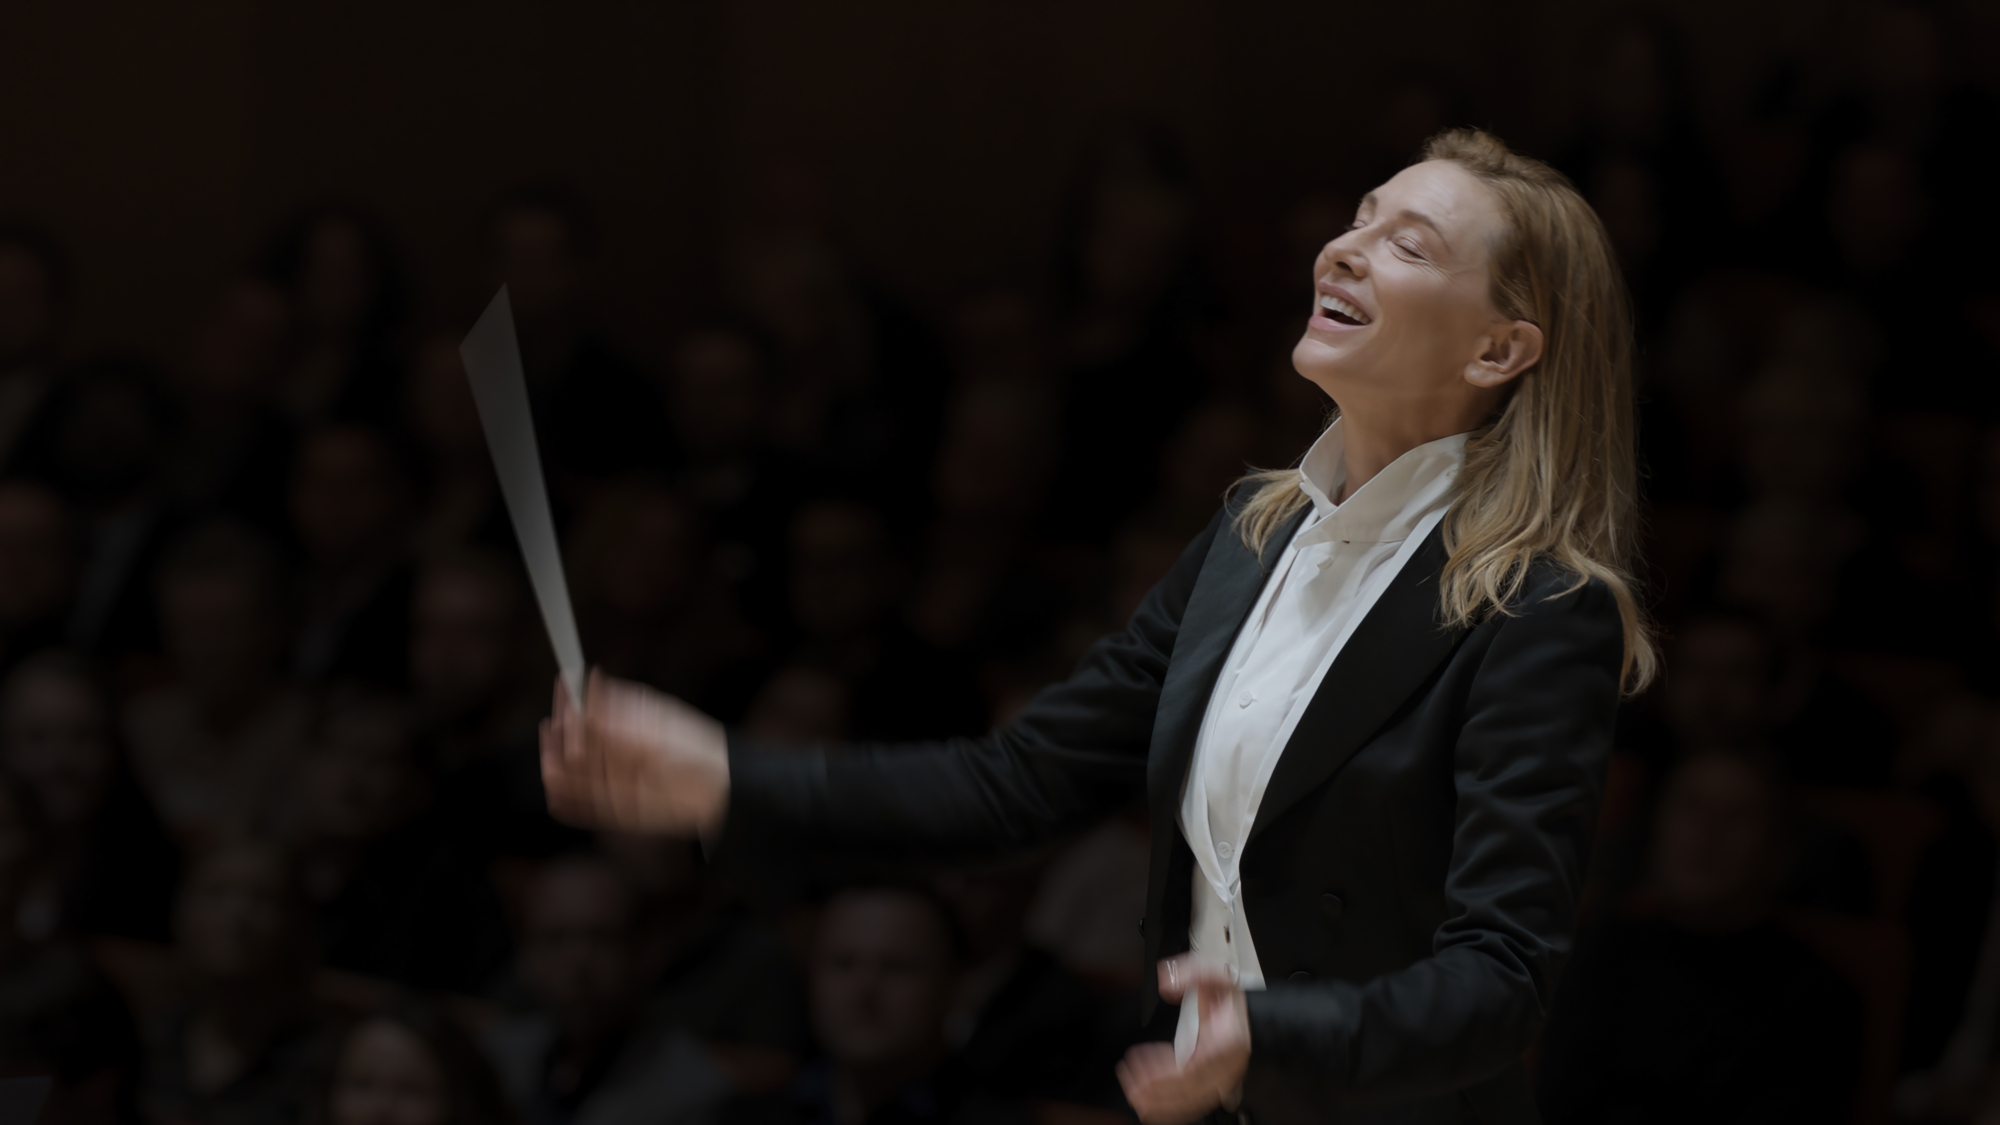 'TÁR' Cate Blanchett as Lydia Tár smiling wearing a suit while conducting an orchestra